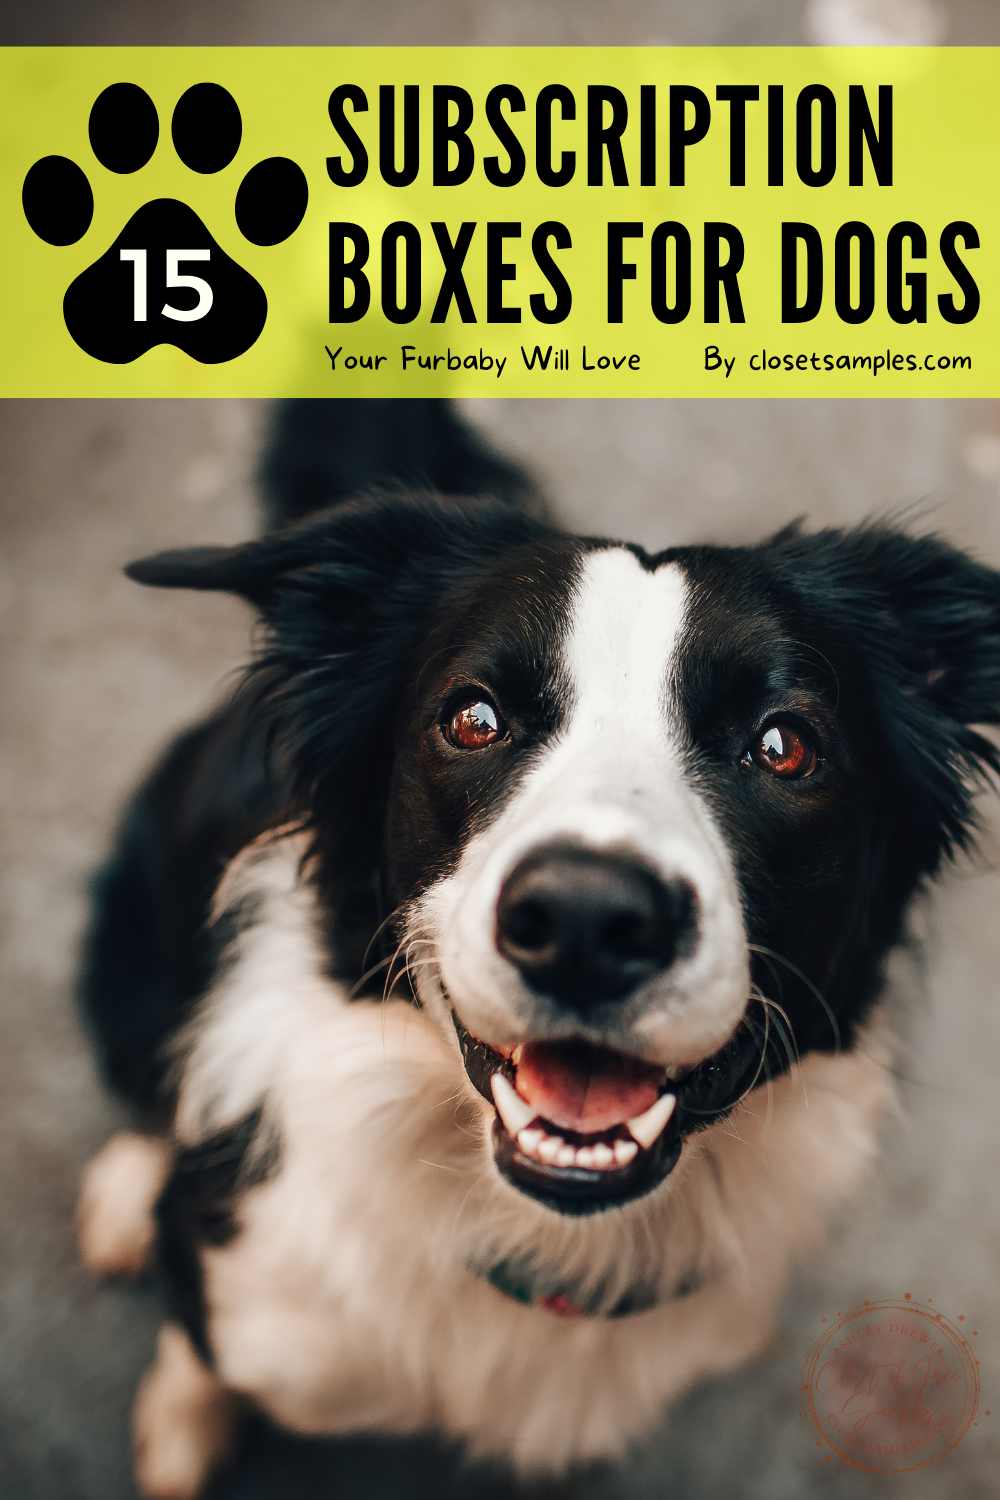 15-Subscription-Boxes-for-Dogs-Your-Furbaby-Will-Love-cratejoy-closetsamples-Pinterest.png